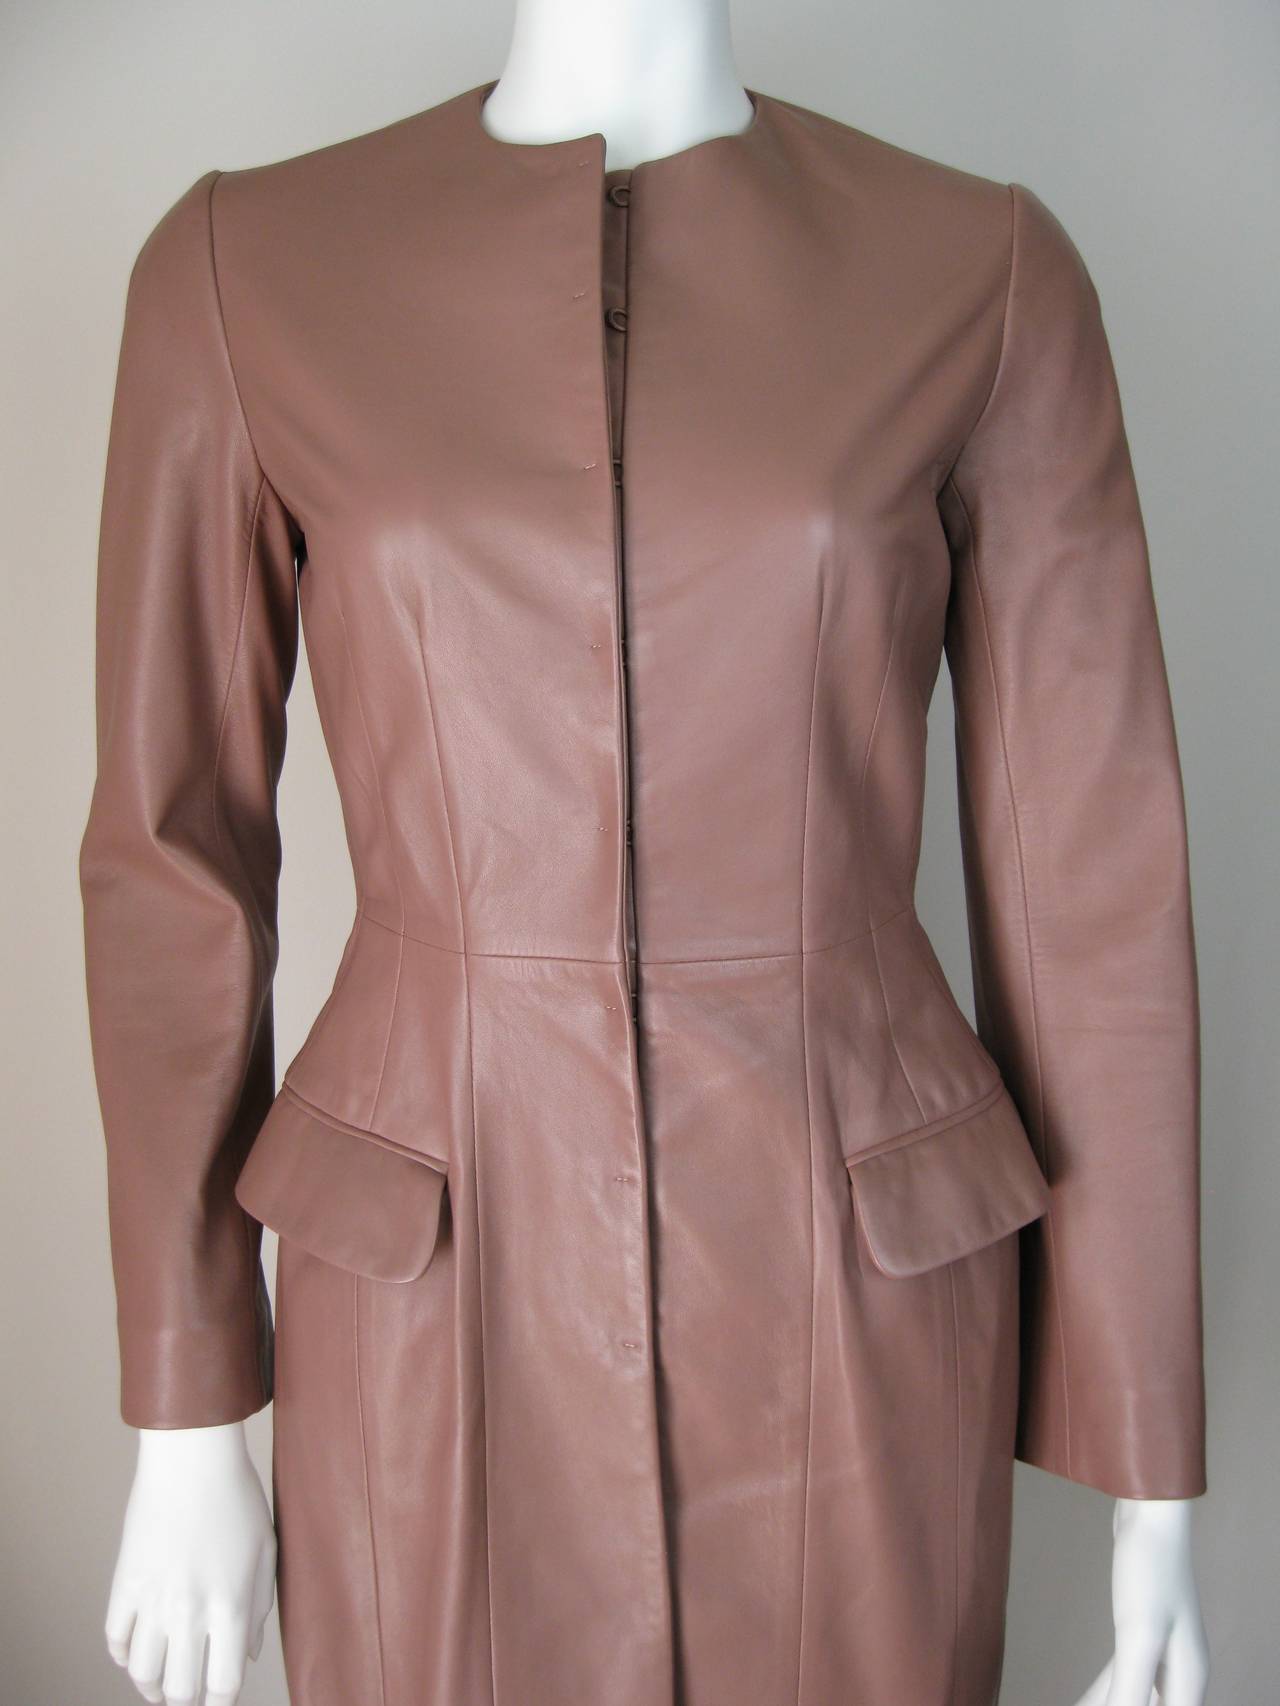 Mauve Christian Dior leather fitted coat dress              Size 4 1